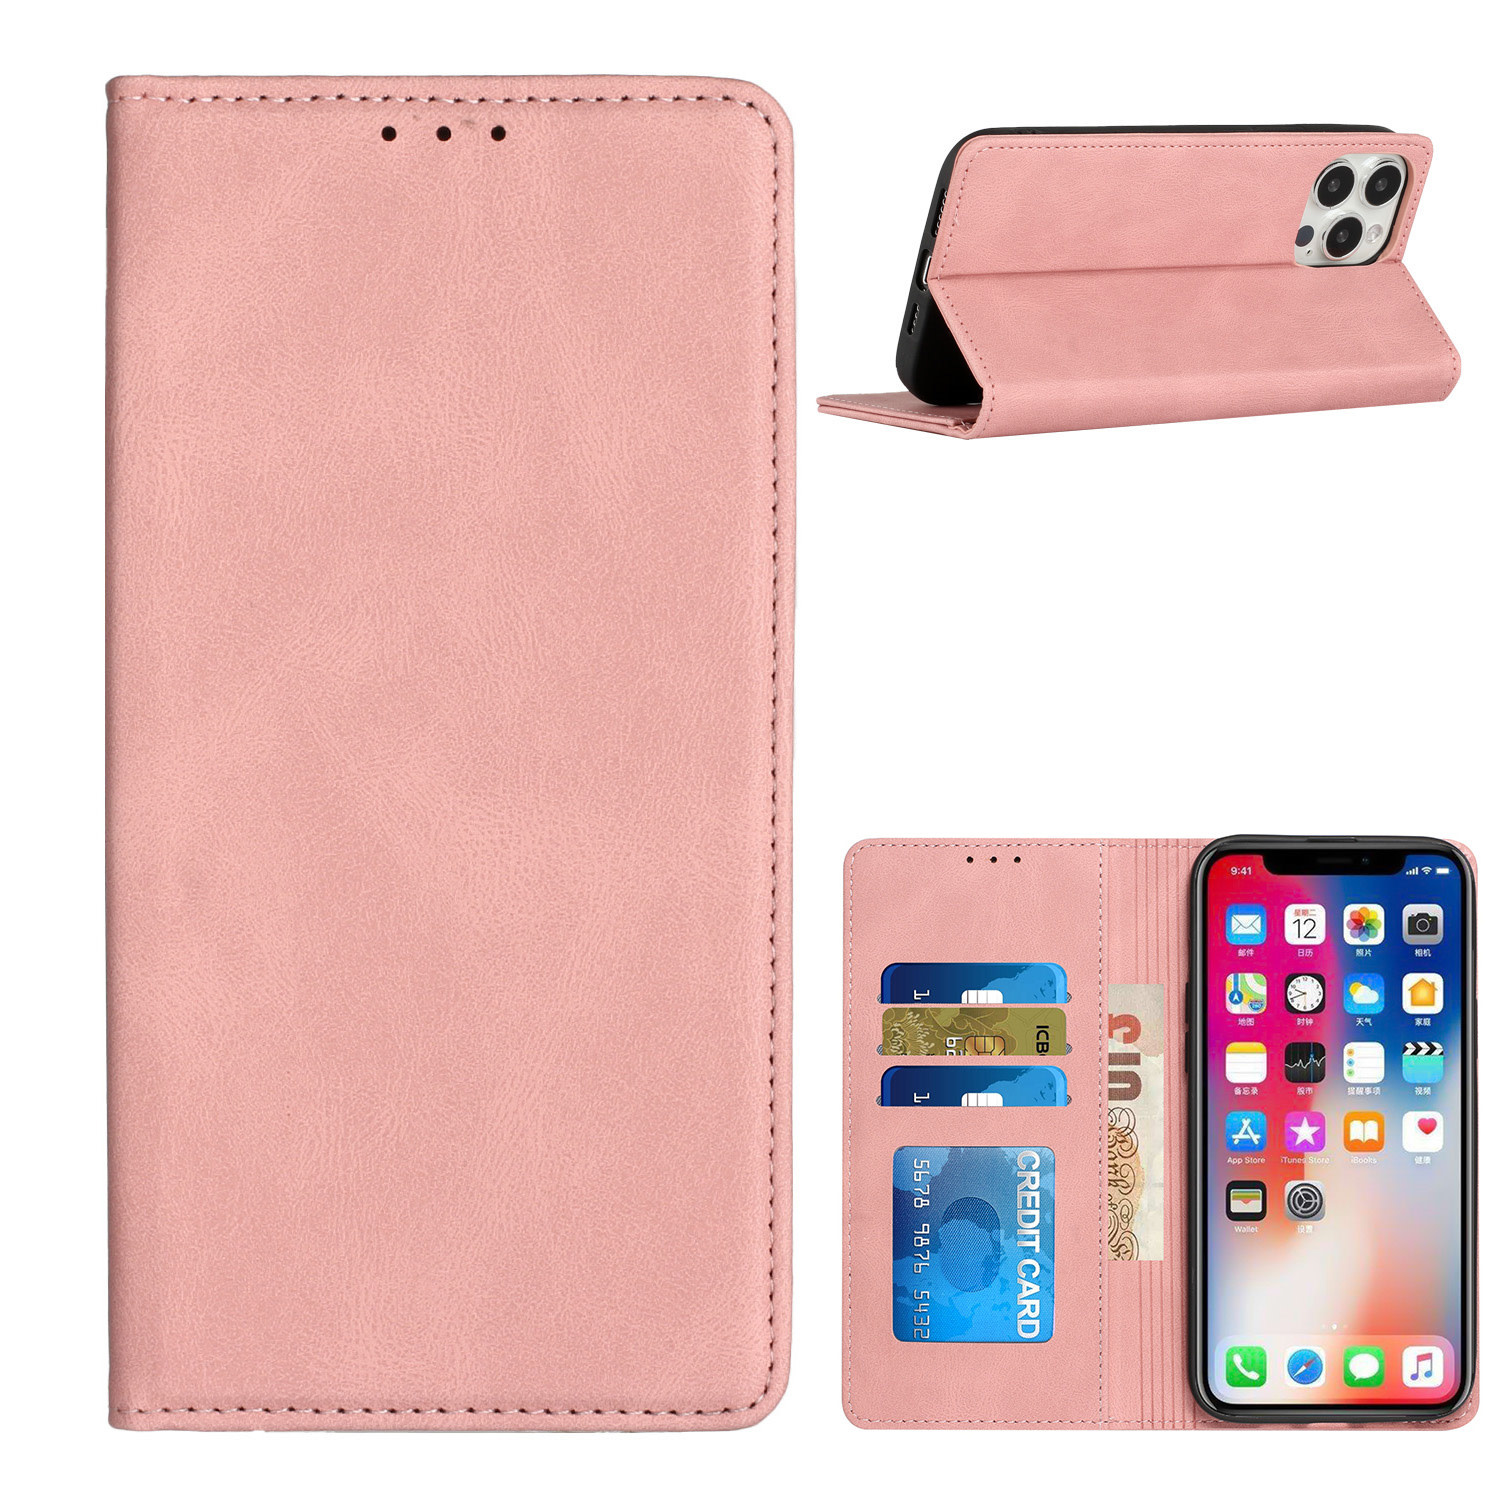 For Moto G 5G 2022 Wallet Premium PU Vegan Leather ID Card Money Holder with Magnetic Closure